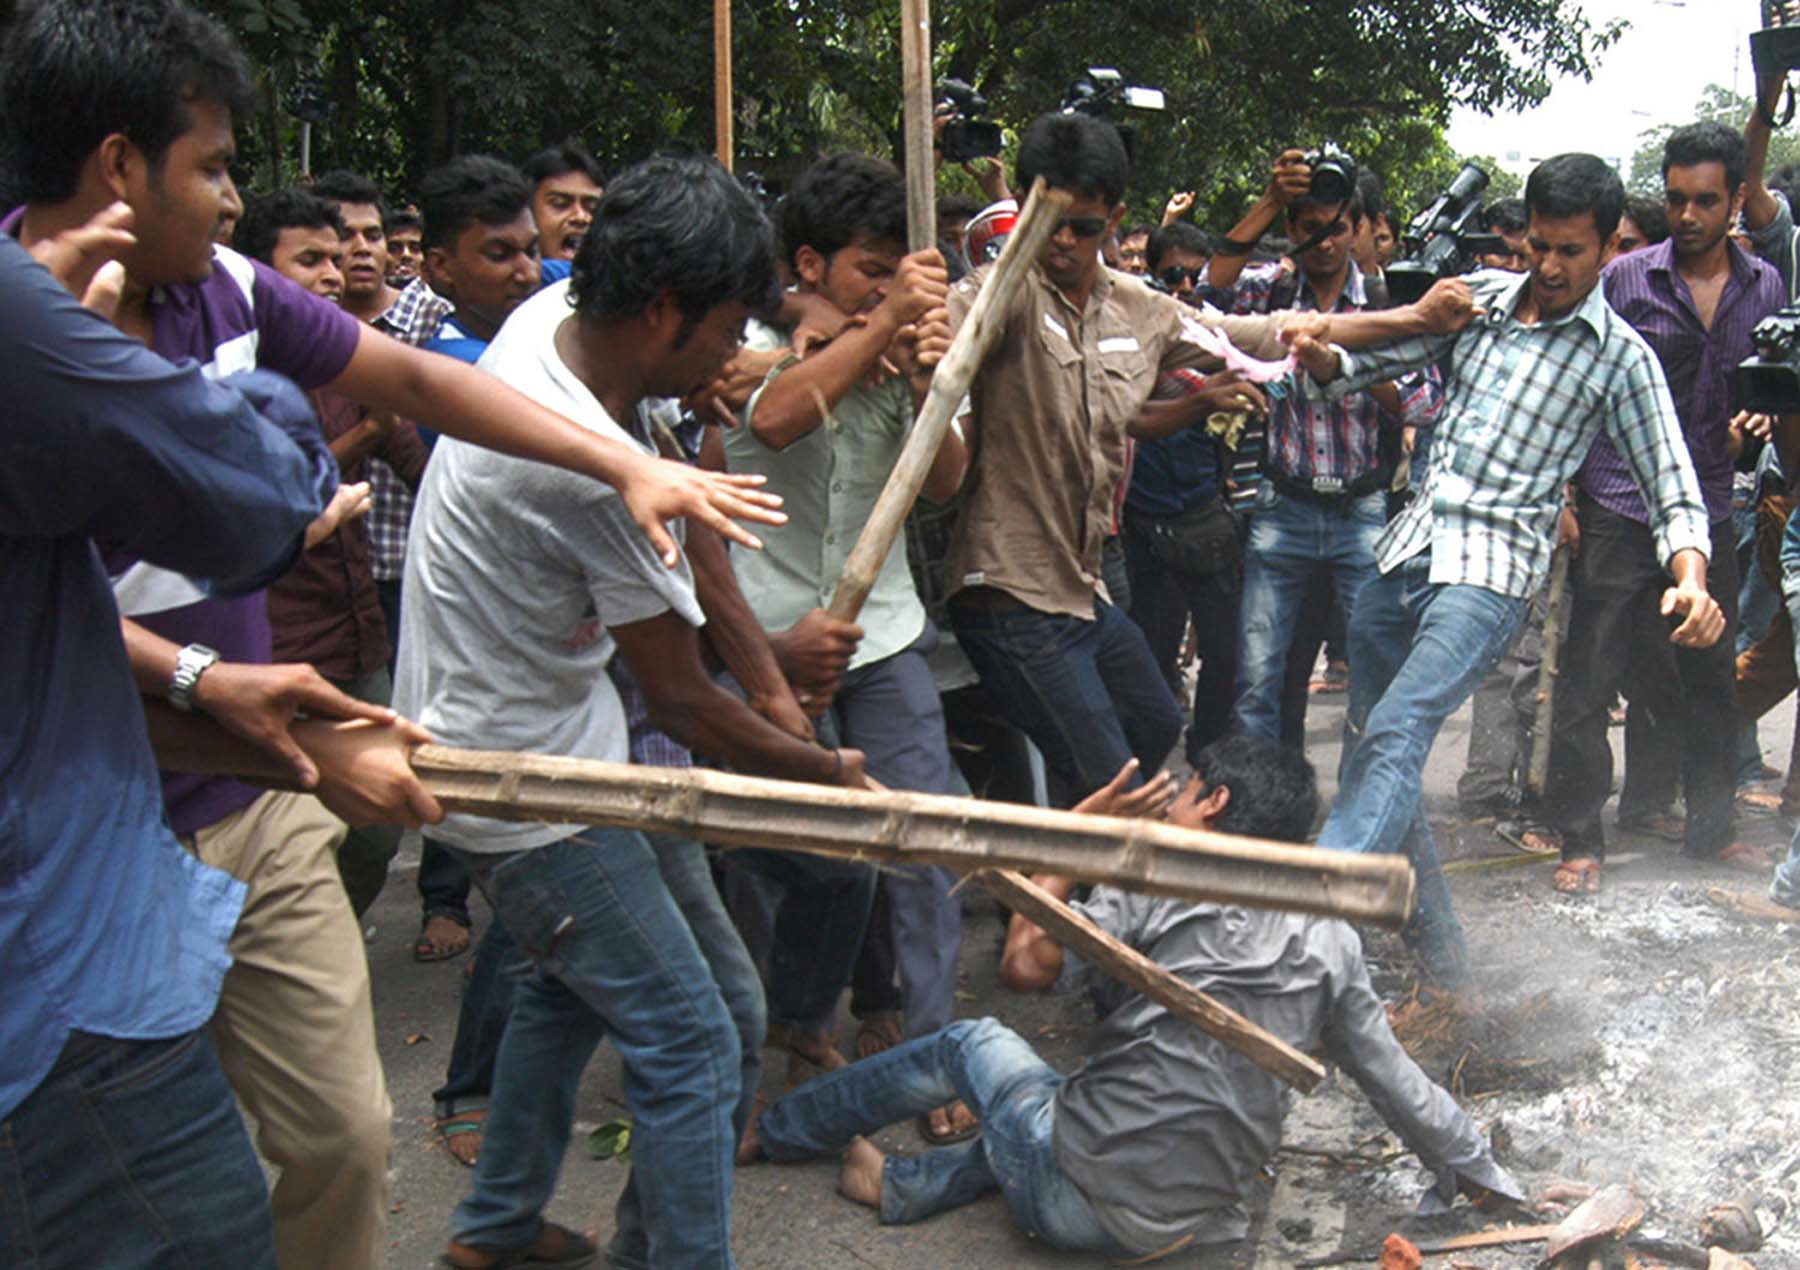 Bangladesh är nummer 19 på listan "most deadly country in the world for journalists". Foto: Khan Md Nazrul Islam | IPS